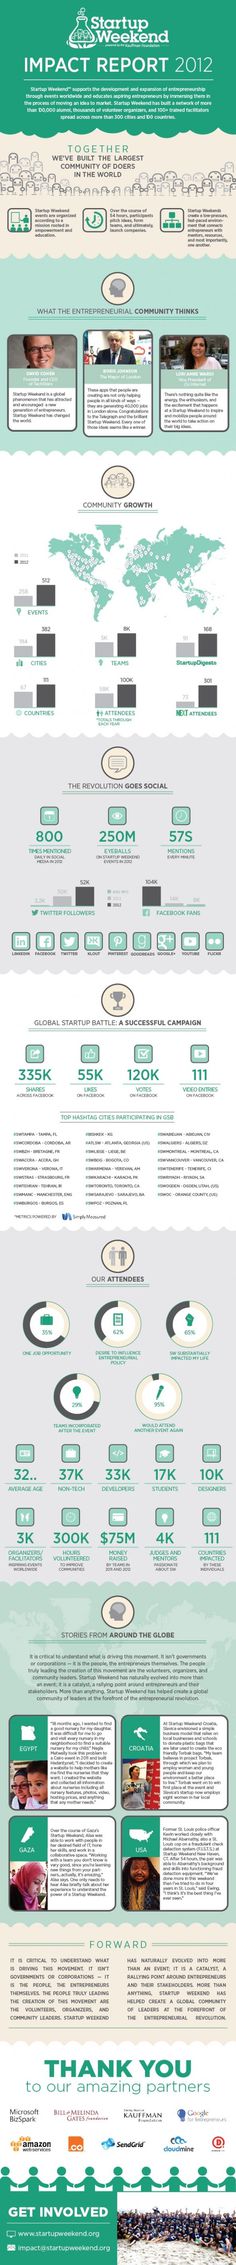 startup weekend impact report #information #text #close #infographic #design #graphic #icons #copy #illustration #data #up #section #teal #green